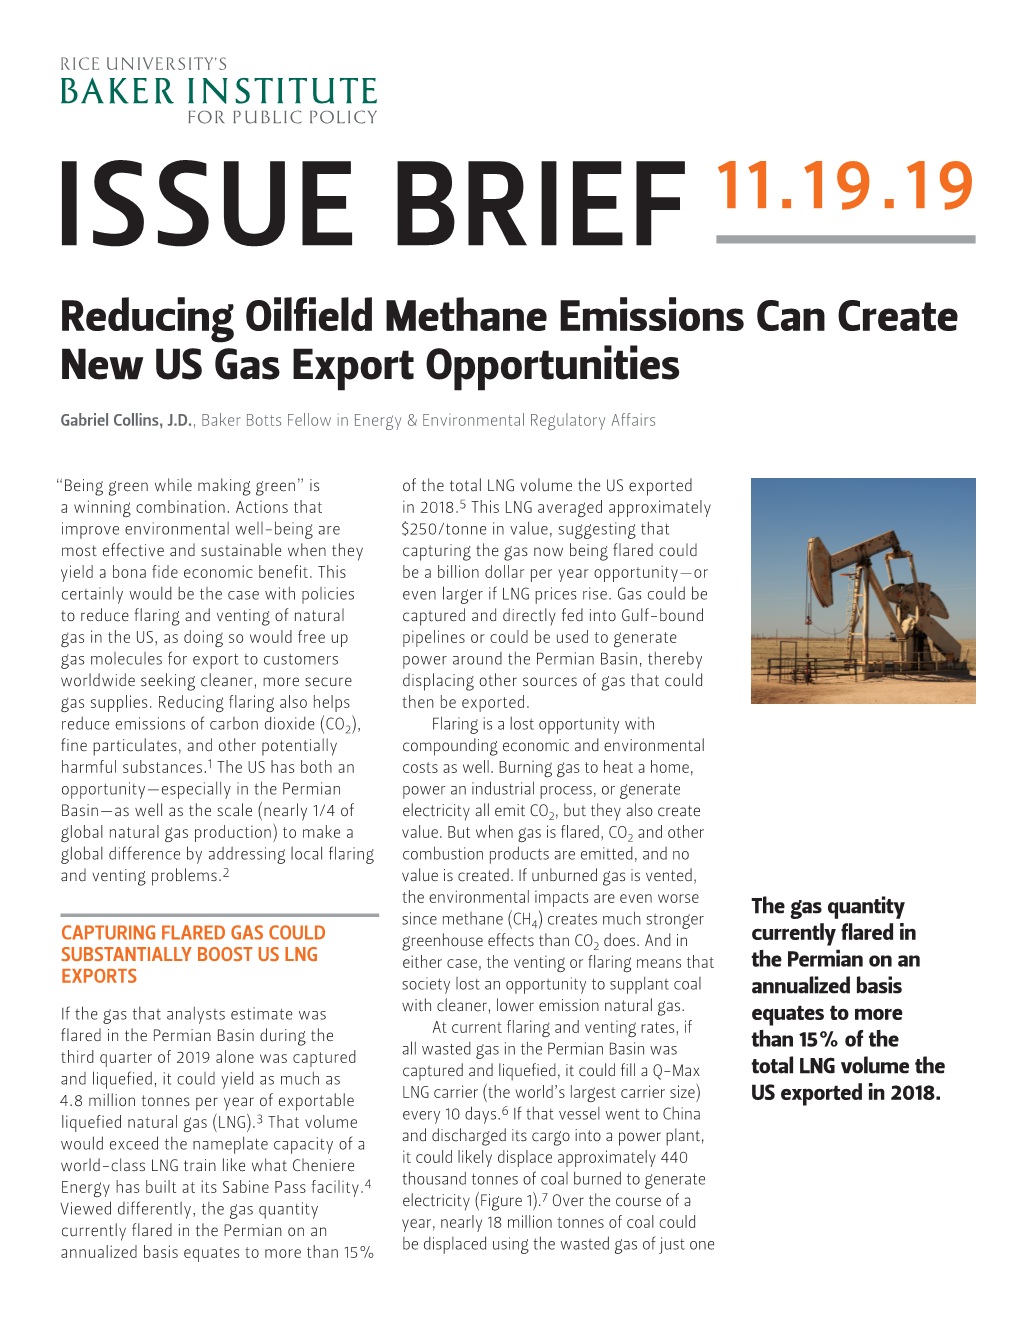 Reducing Oilfield Methane Emissions Can Create New US Gas Export Opportunities